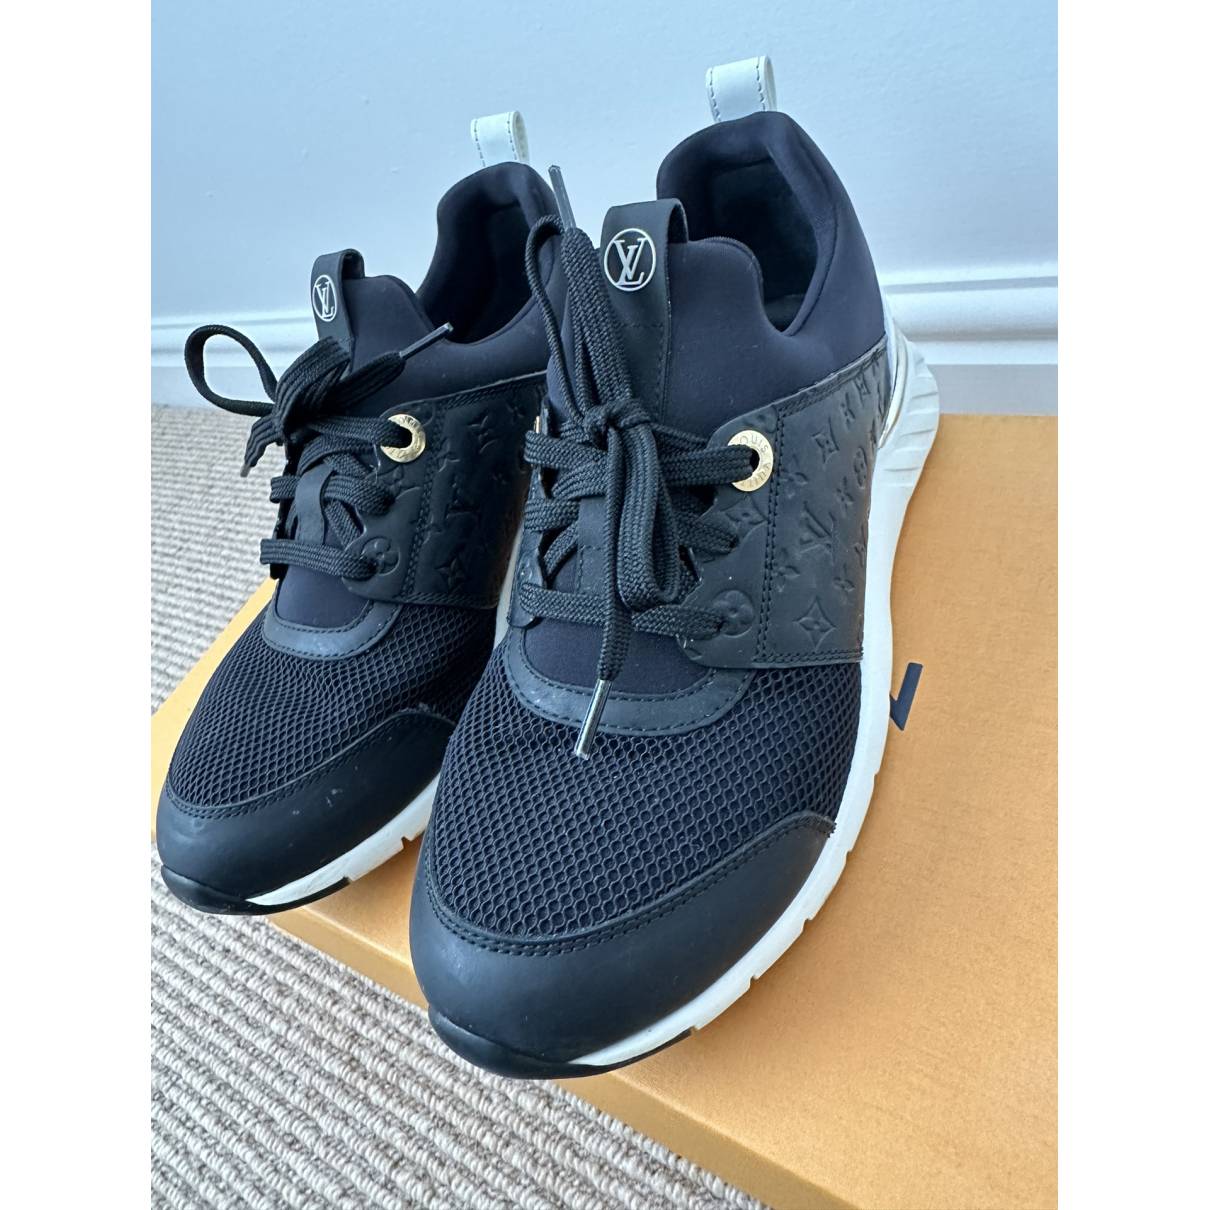 Aftergame cloth trainers Louis Vuitton Black size 36 EU in Cloth